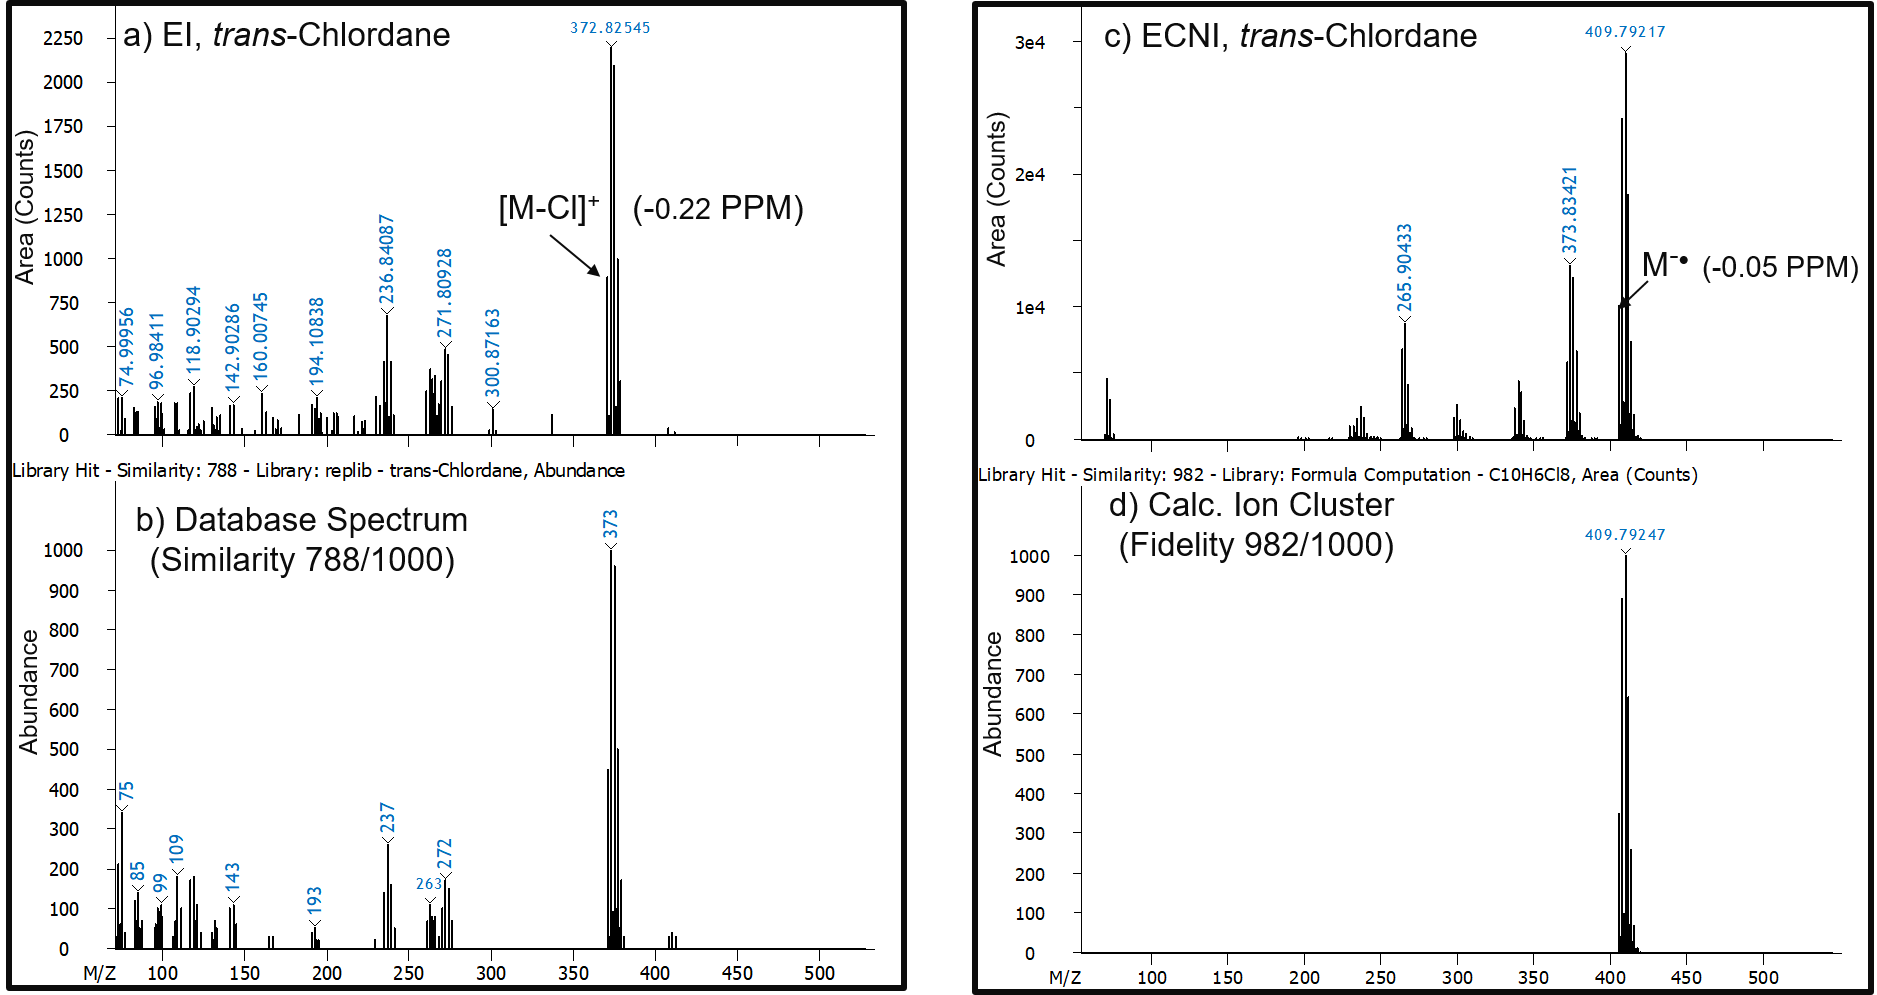 Figure 4: (a) Deconvoluted EI and (b) database mass spectra and similarity score for trans-chlordane. (c) Deconvoluted ECNI mass spectrum and (d) calculated ion cluster with isotopic fidelity score for trans-chlordane.